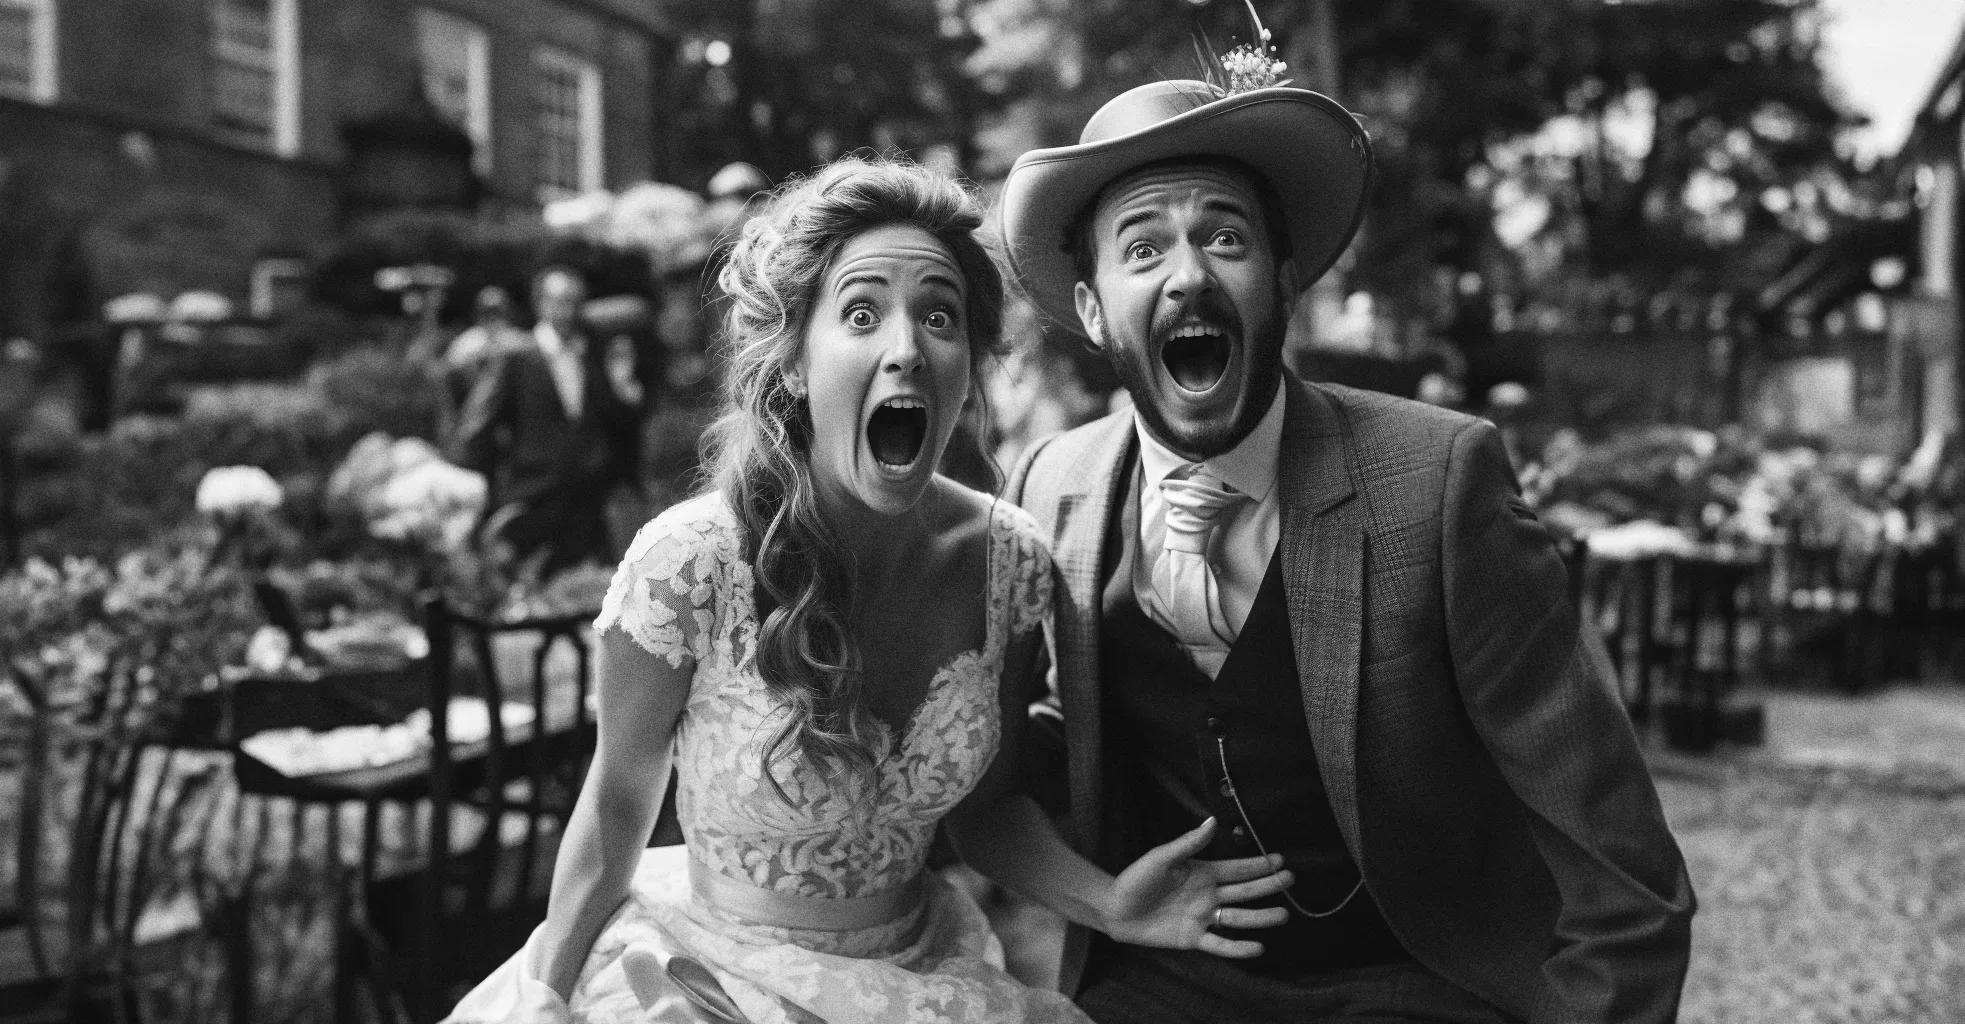 A black and white photo of a bride and groom with their mouths open. Exclusive Wedding Photography Offer